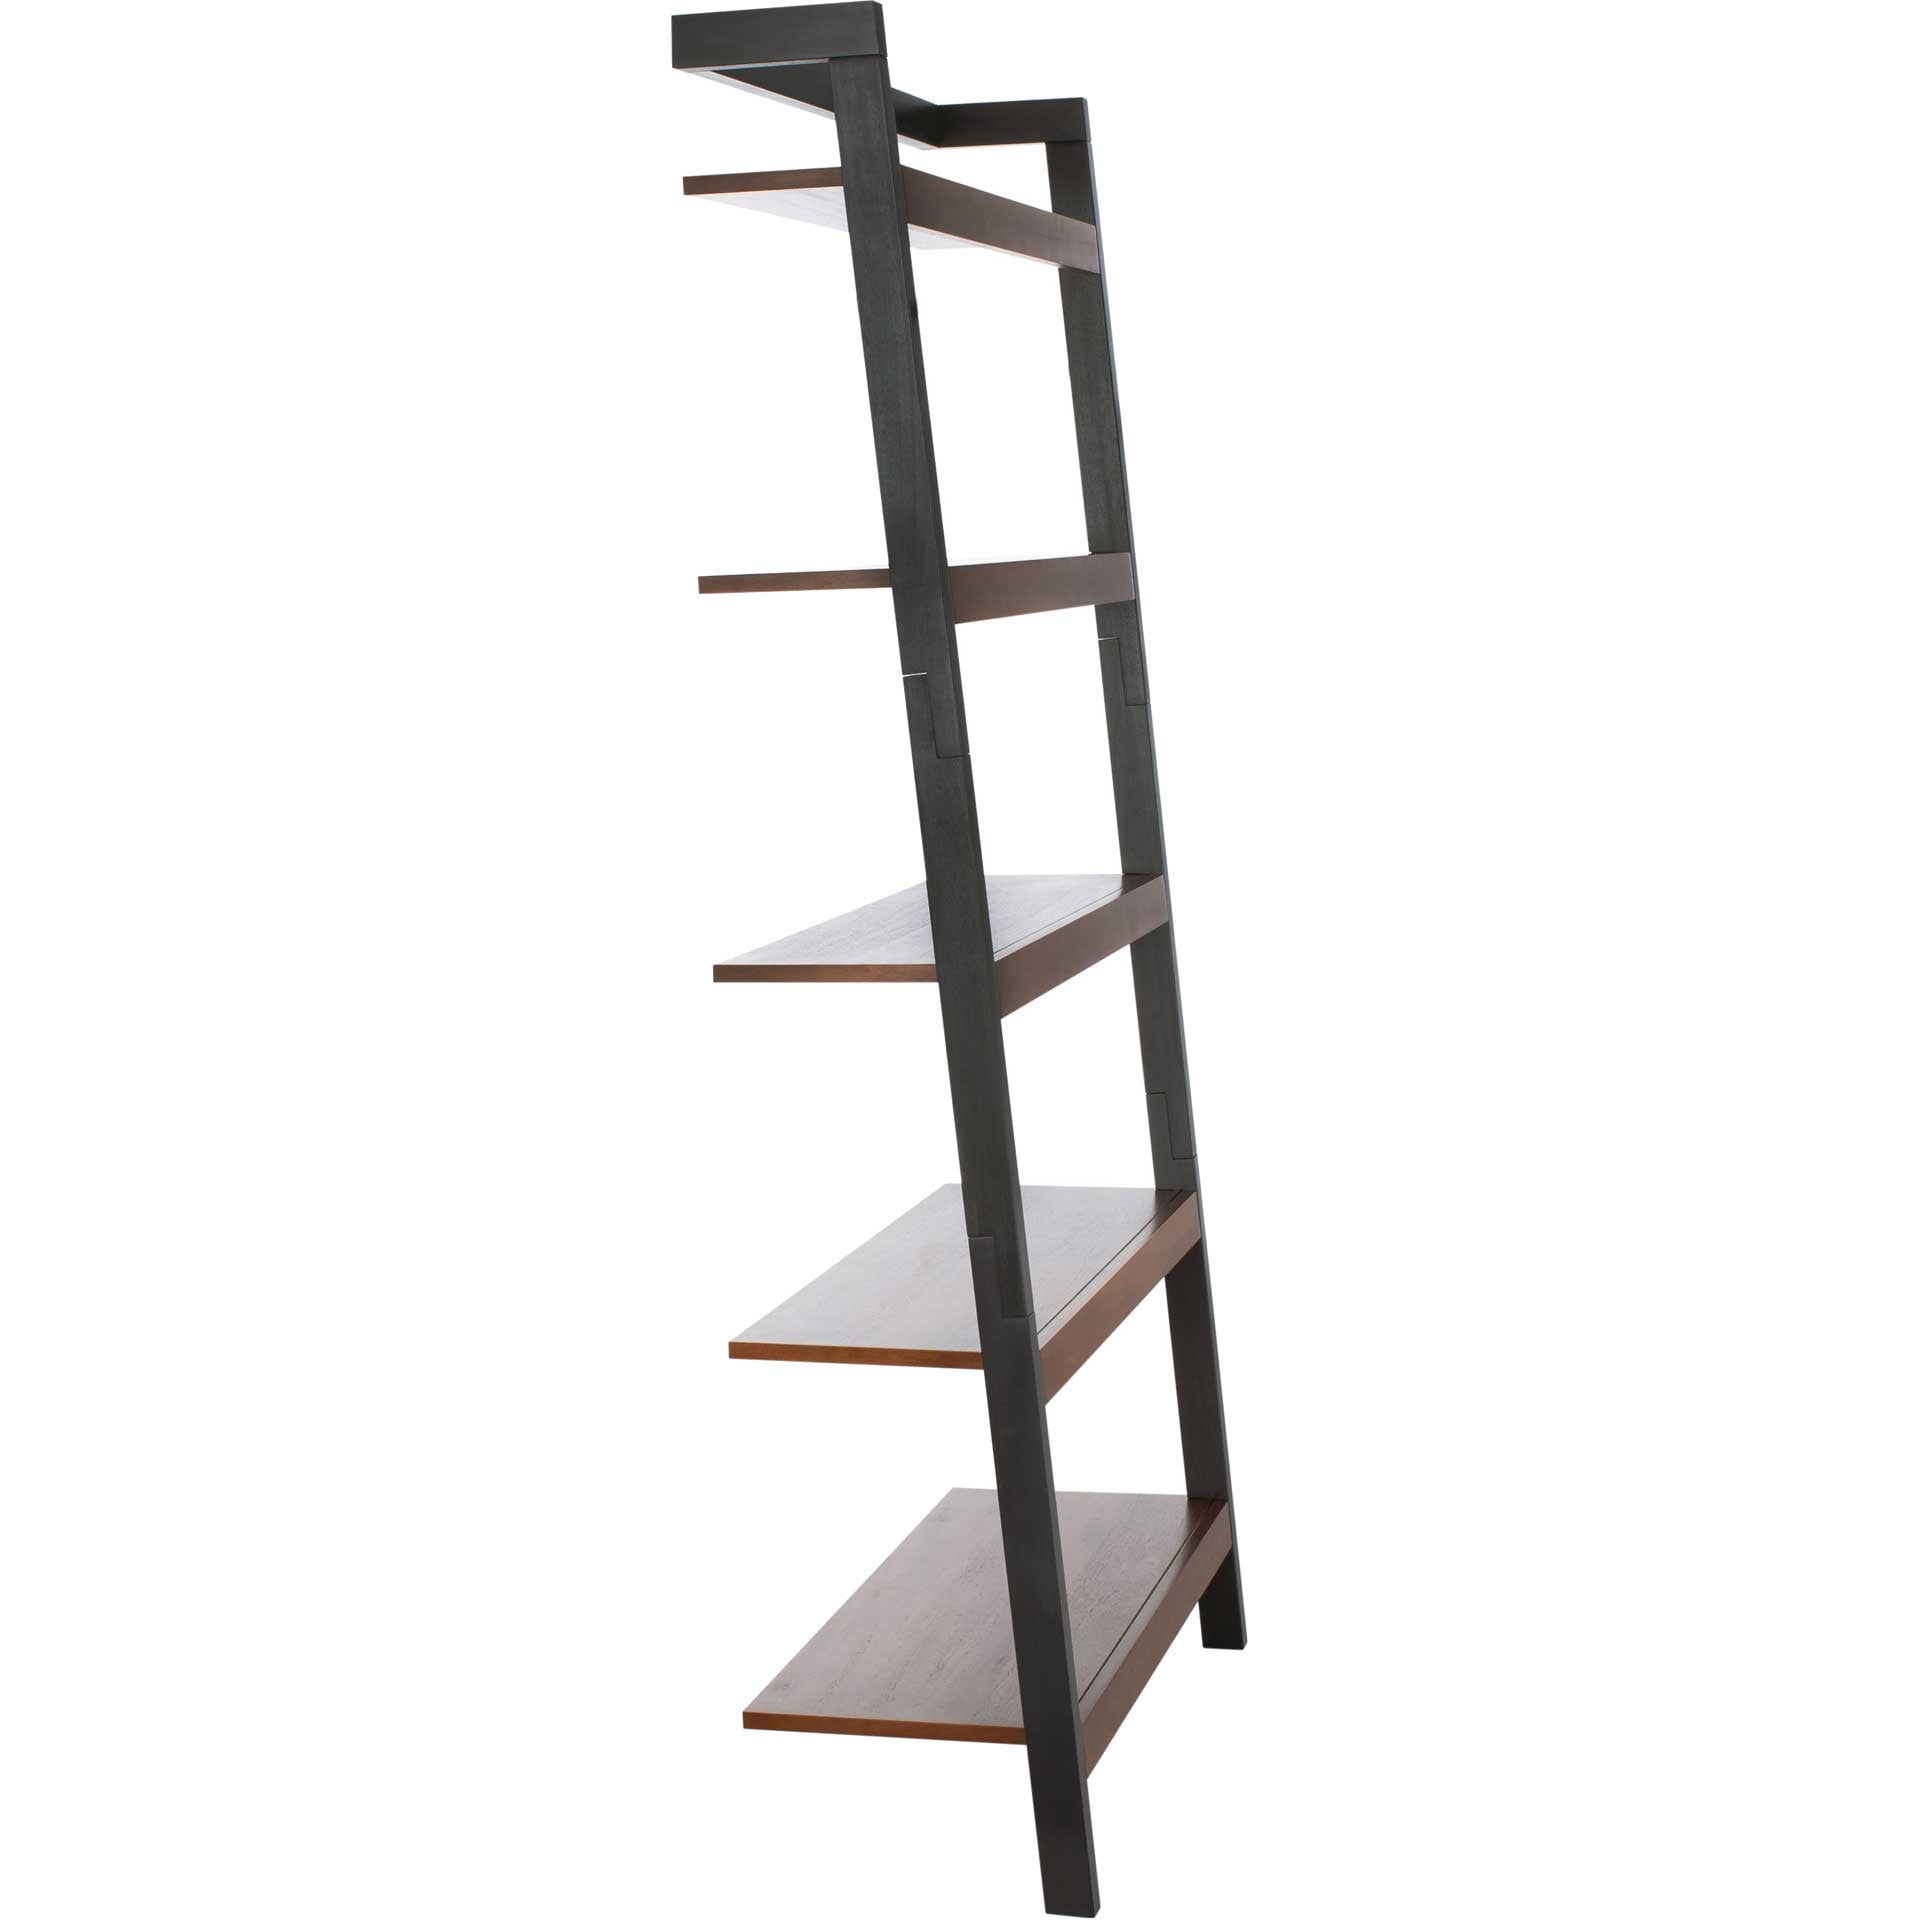 Belami 5 Tier Leaning Etagere Honey Brown/Charcoal